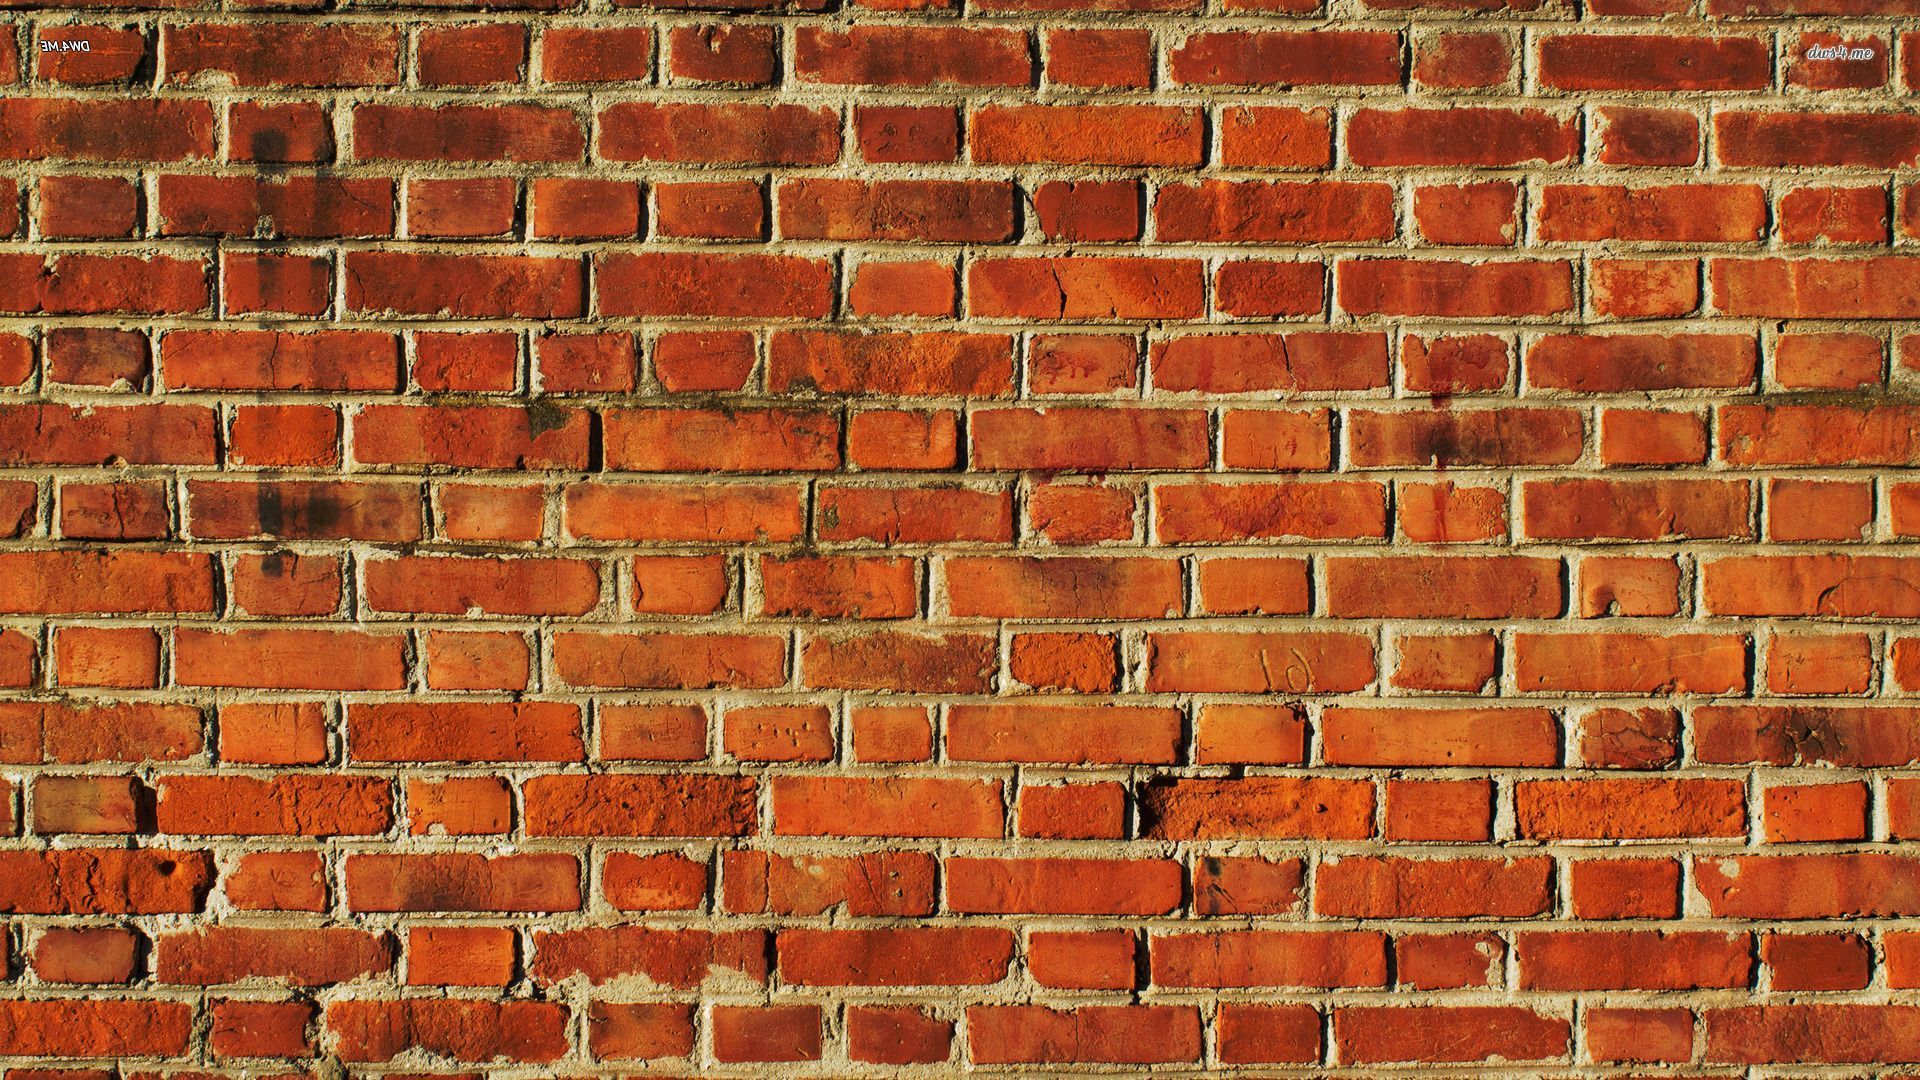 40 Hd Brick Wallpapers Backgrounds For Free Download HD Wallpapers Download Free Images Wallpaper [wallpaper981.blogspot.com]